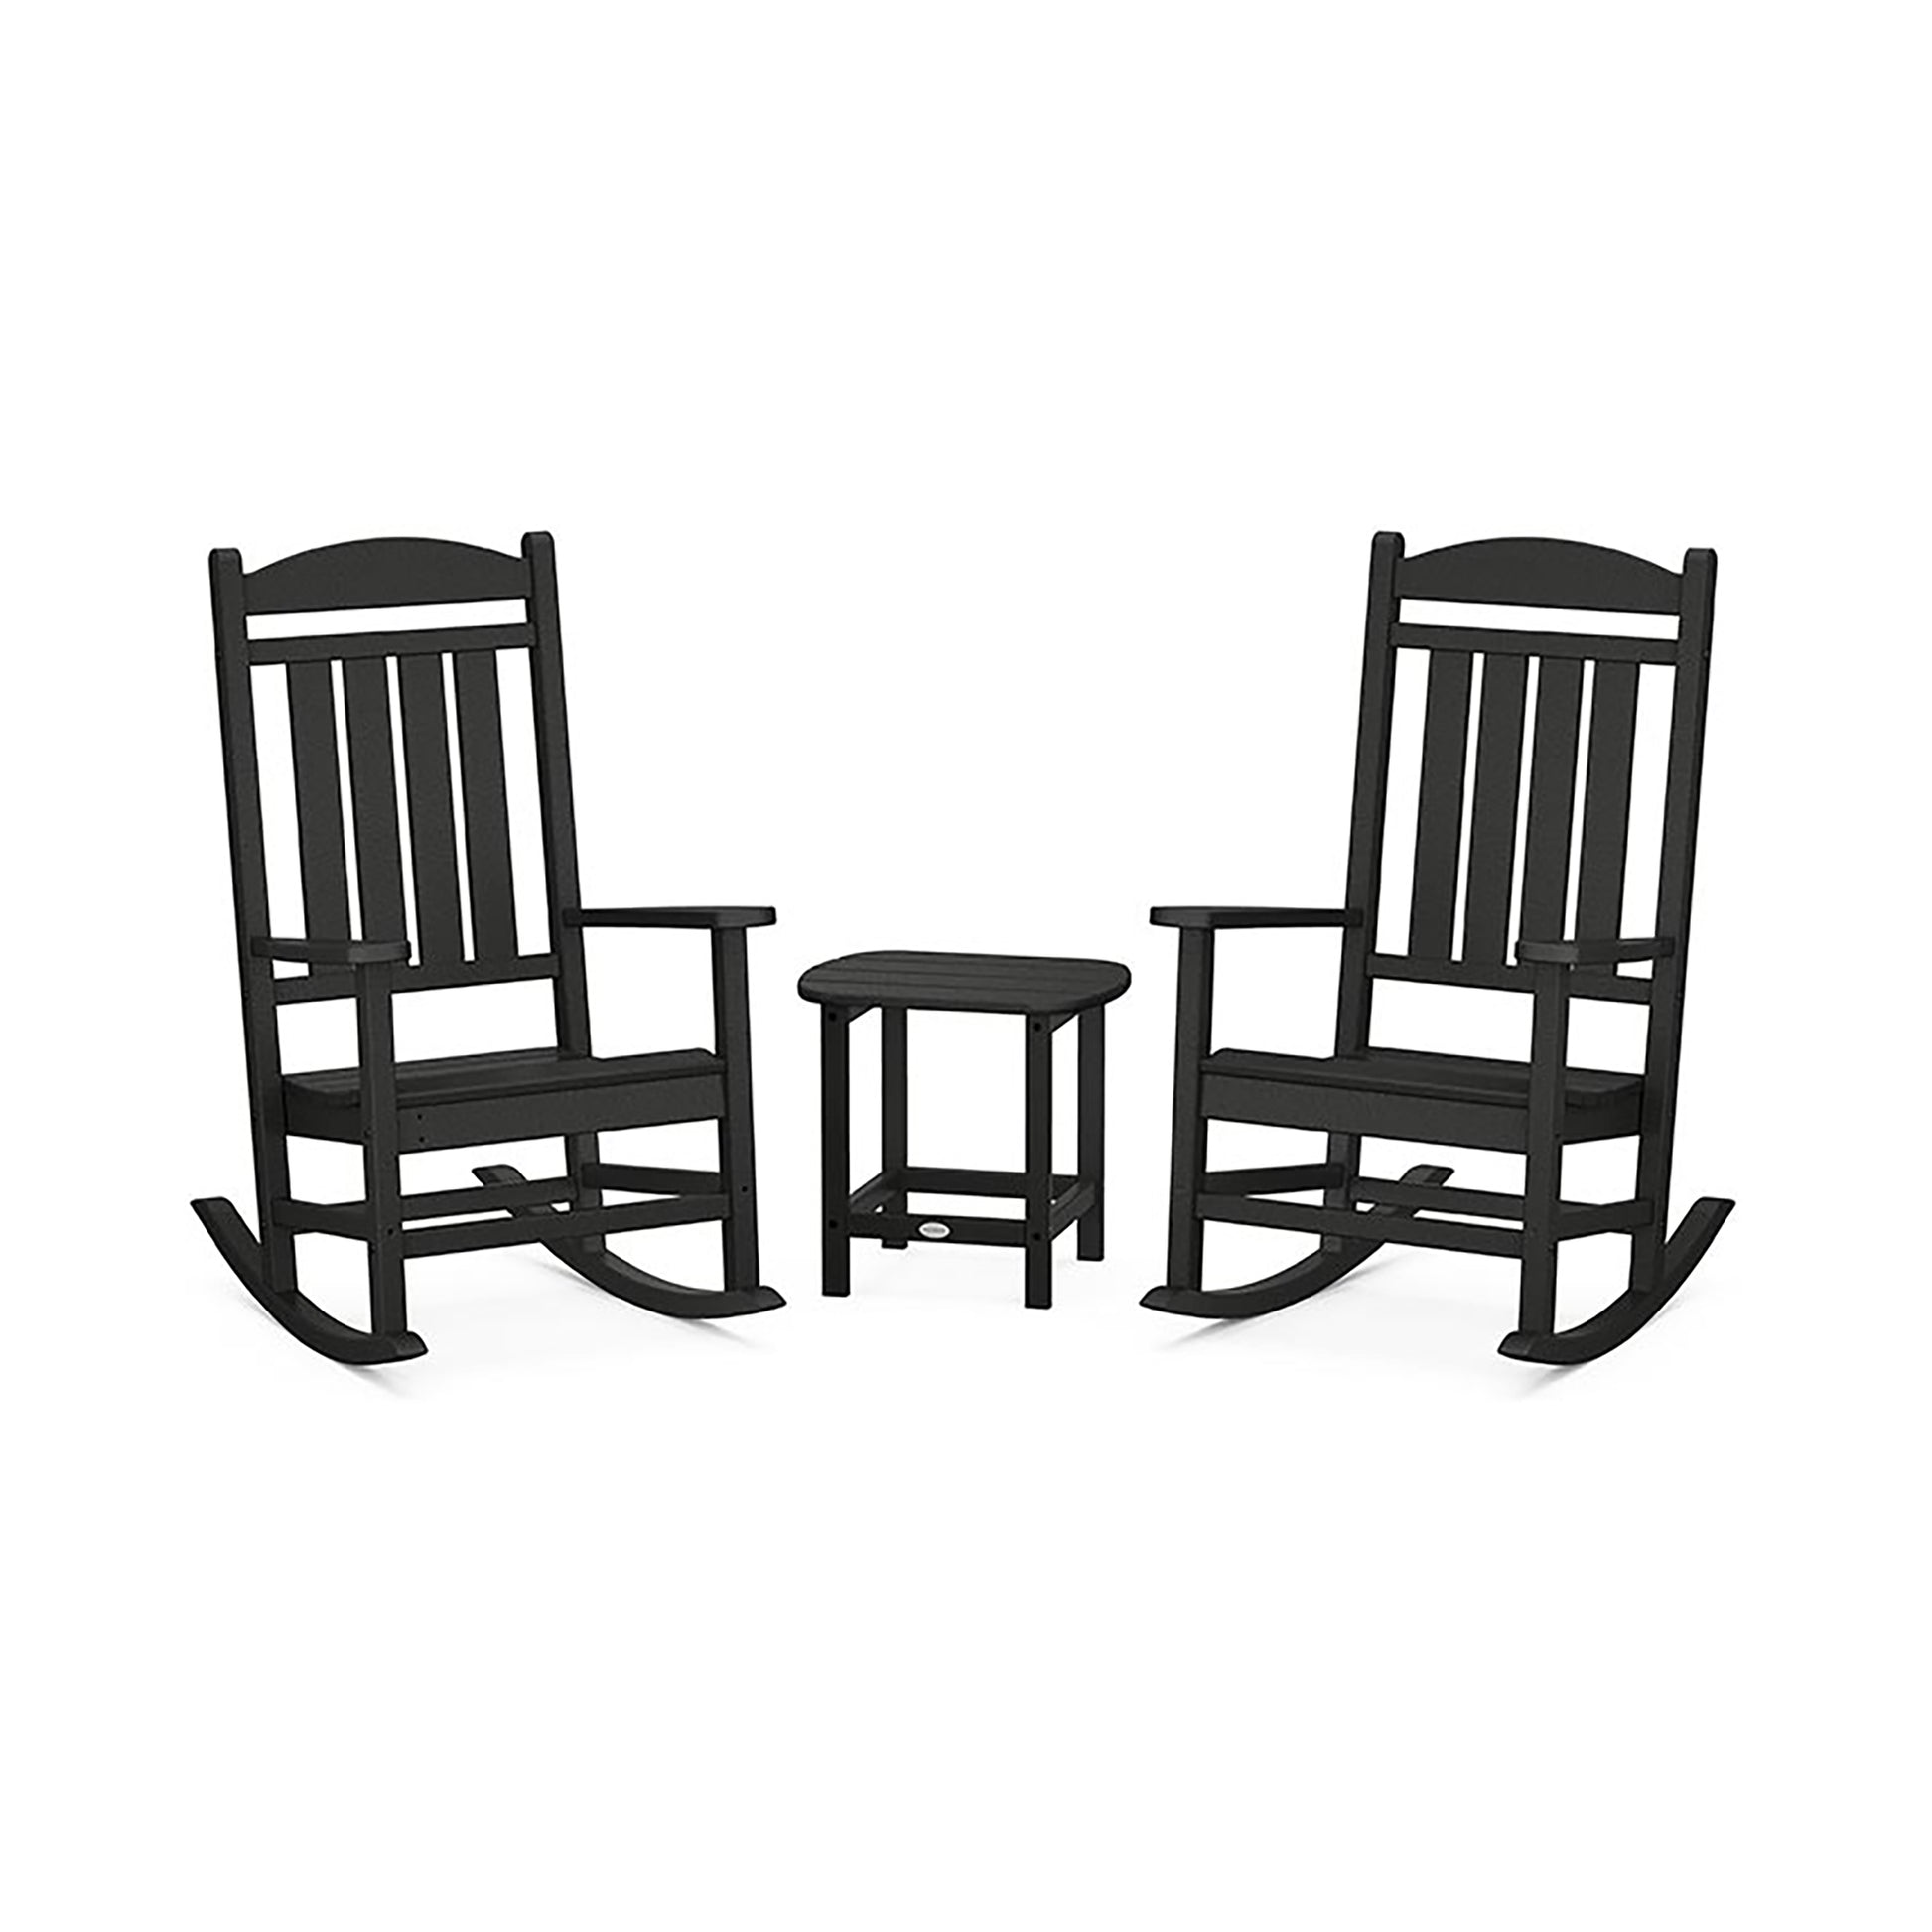 Two black POLYWOOD Presidential Outdoor Rocking Chair 3-Piece Sets, facing each other with a small matching stool between them, set against a white background.